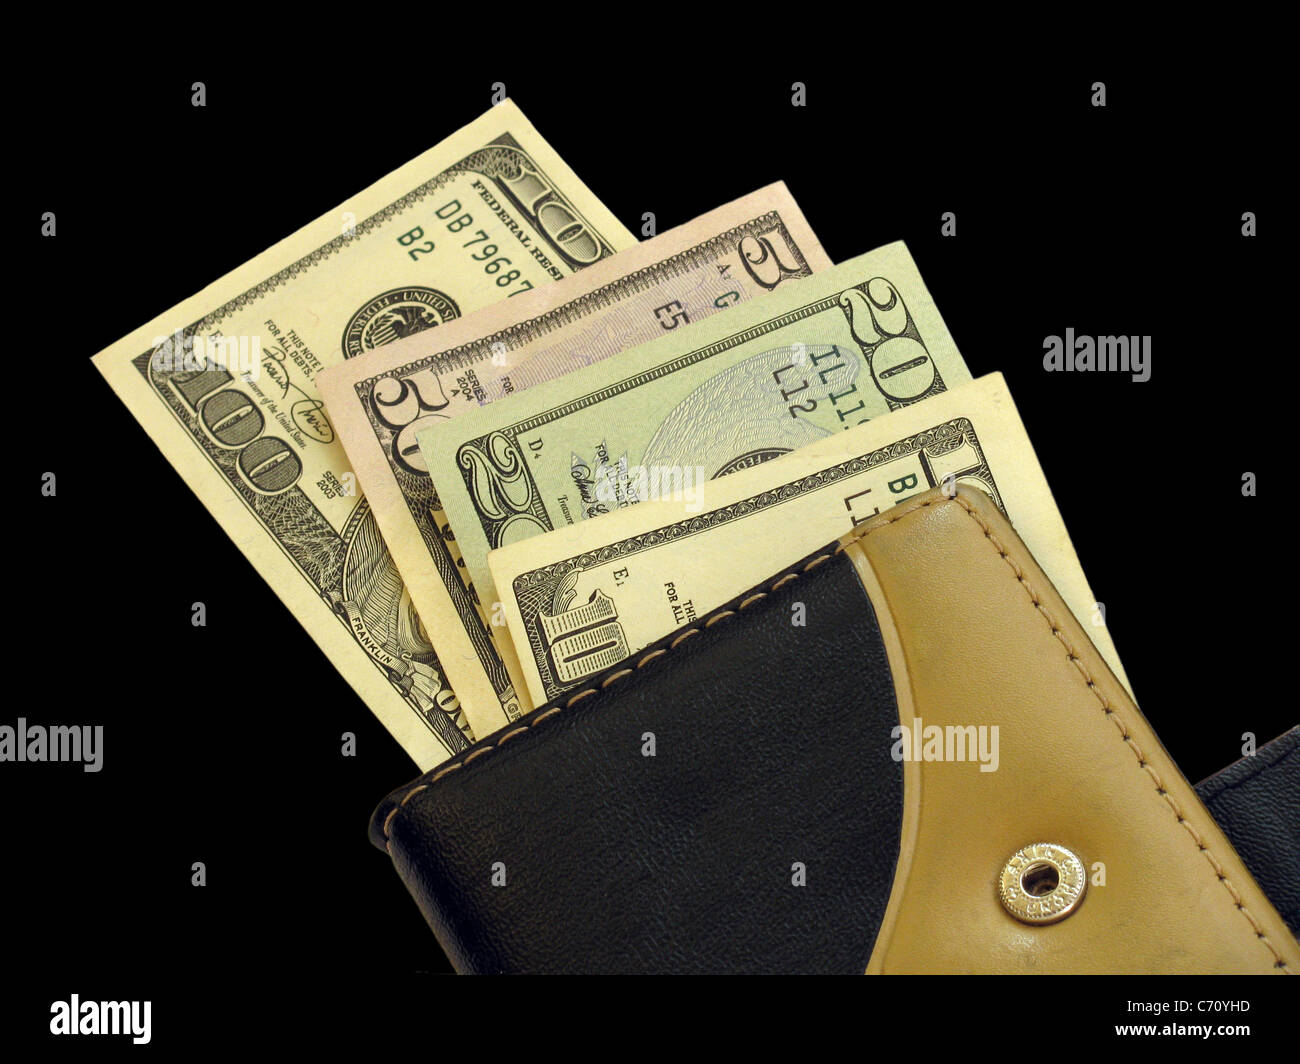 purse with several banknotes (dollars) Stock Photo